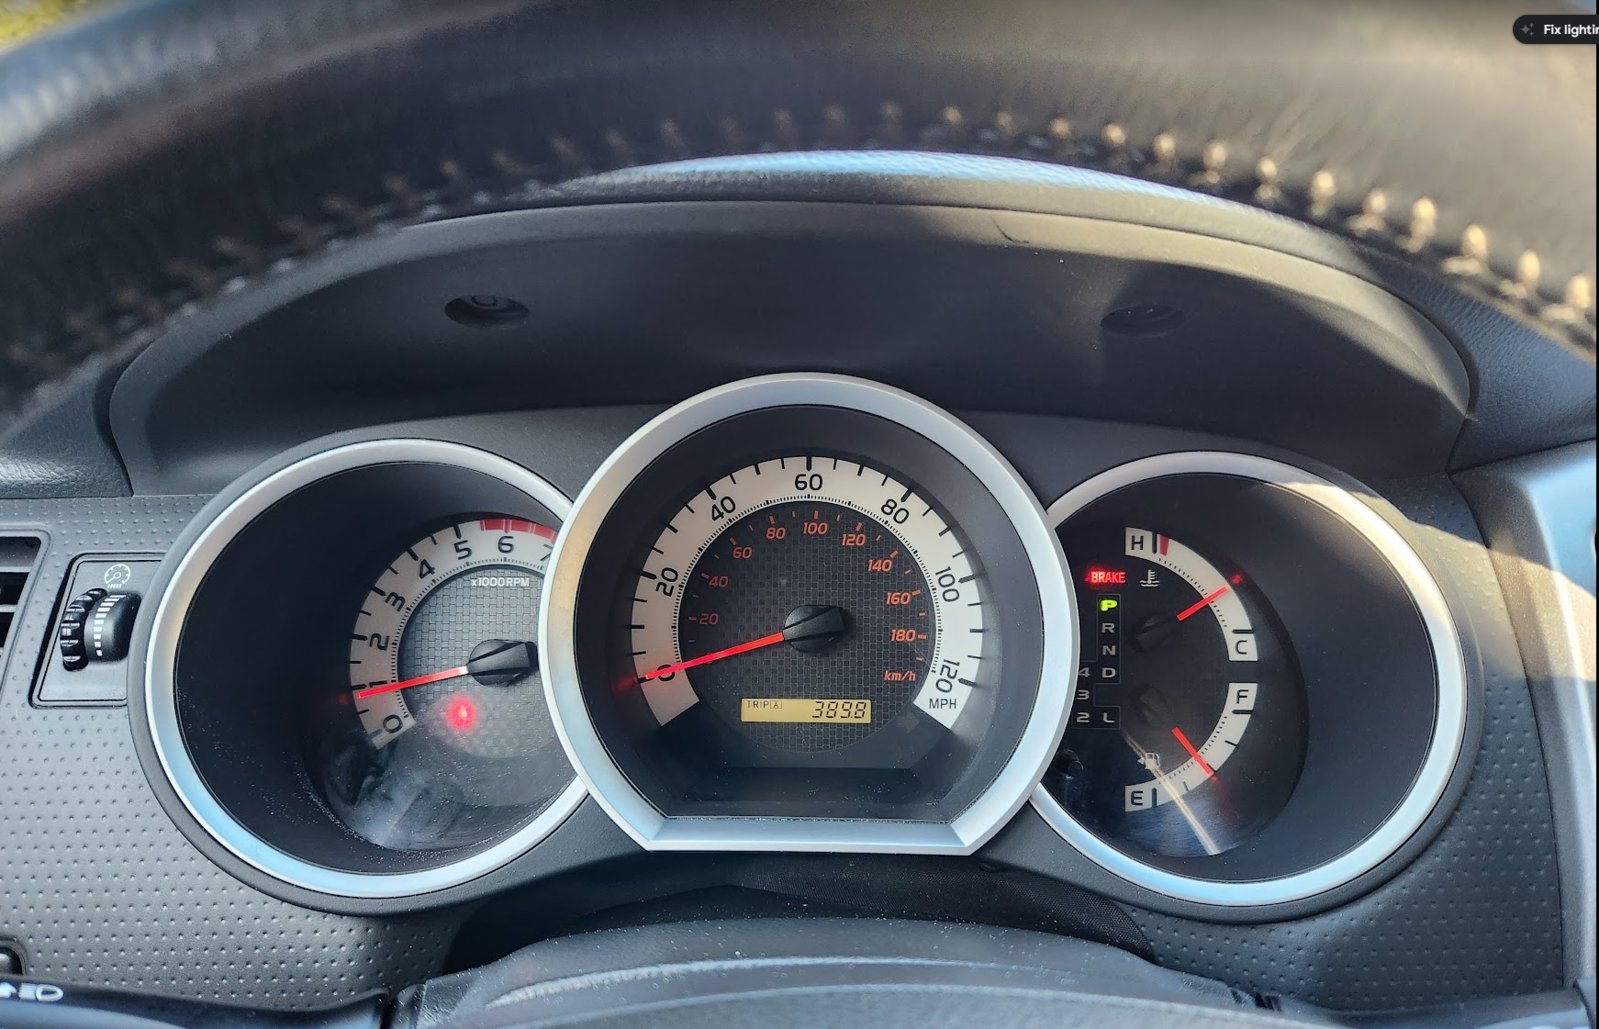 How To Clean Plastic Cover On Gauge Cluster with Meguiars Plastx #amaz